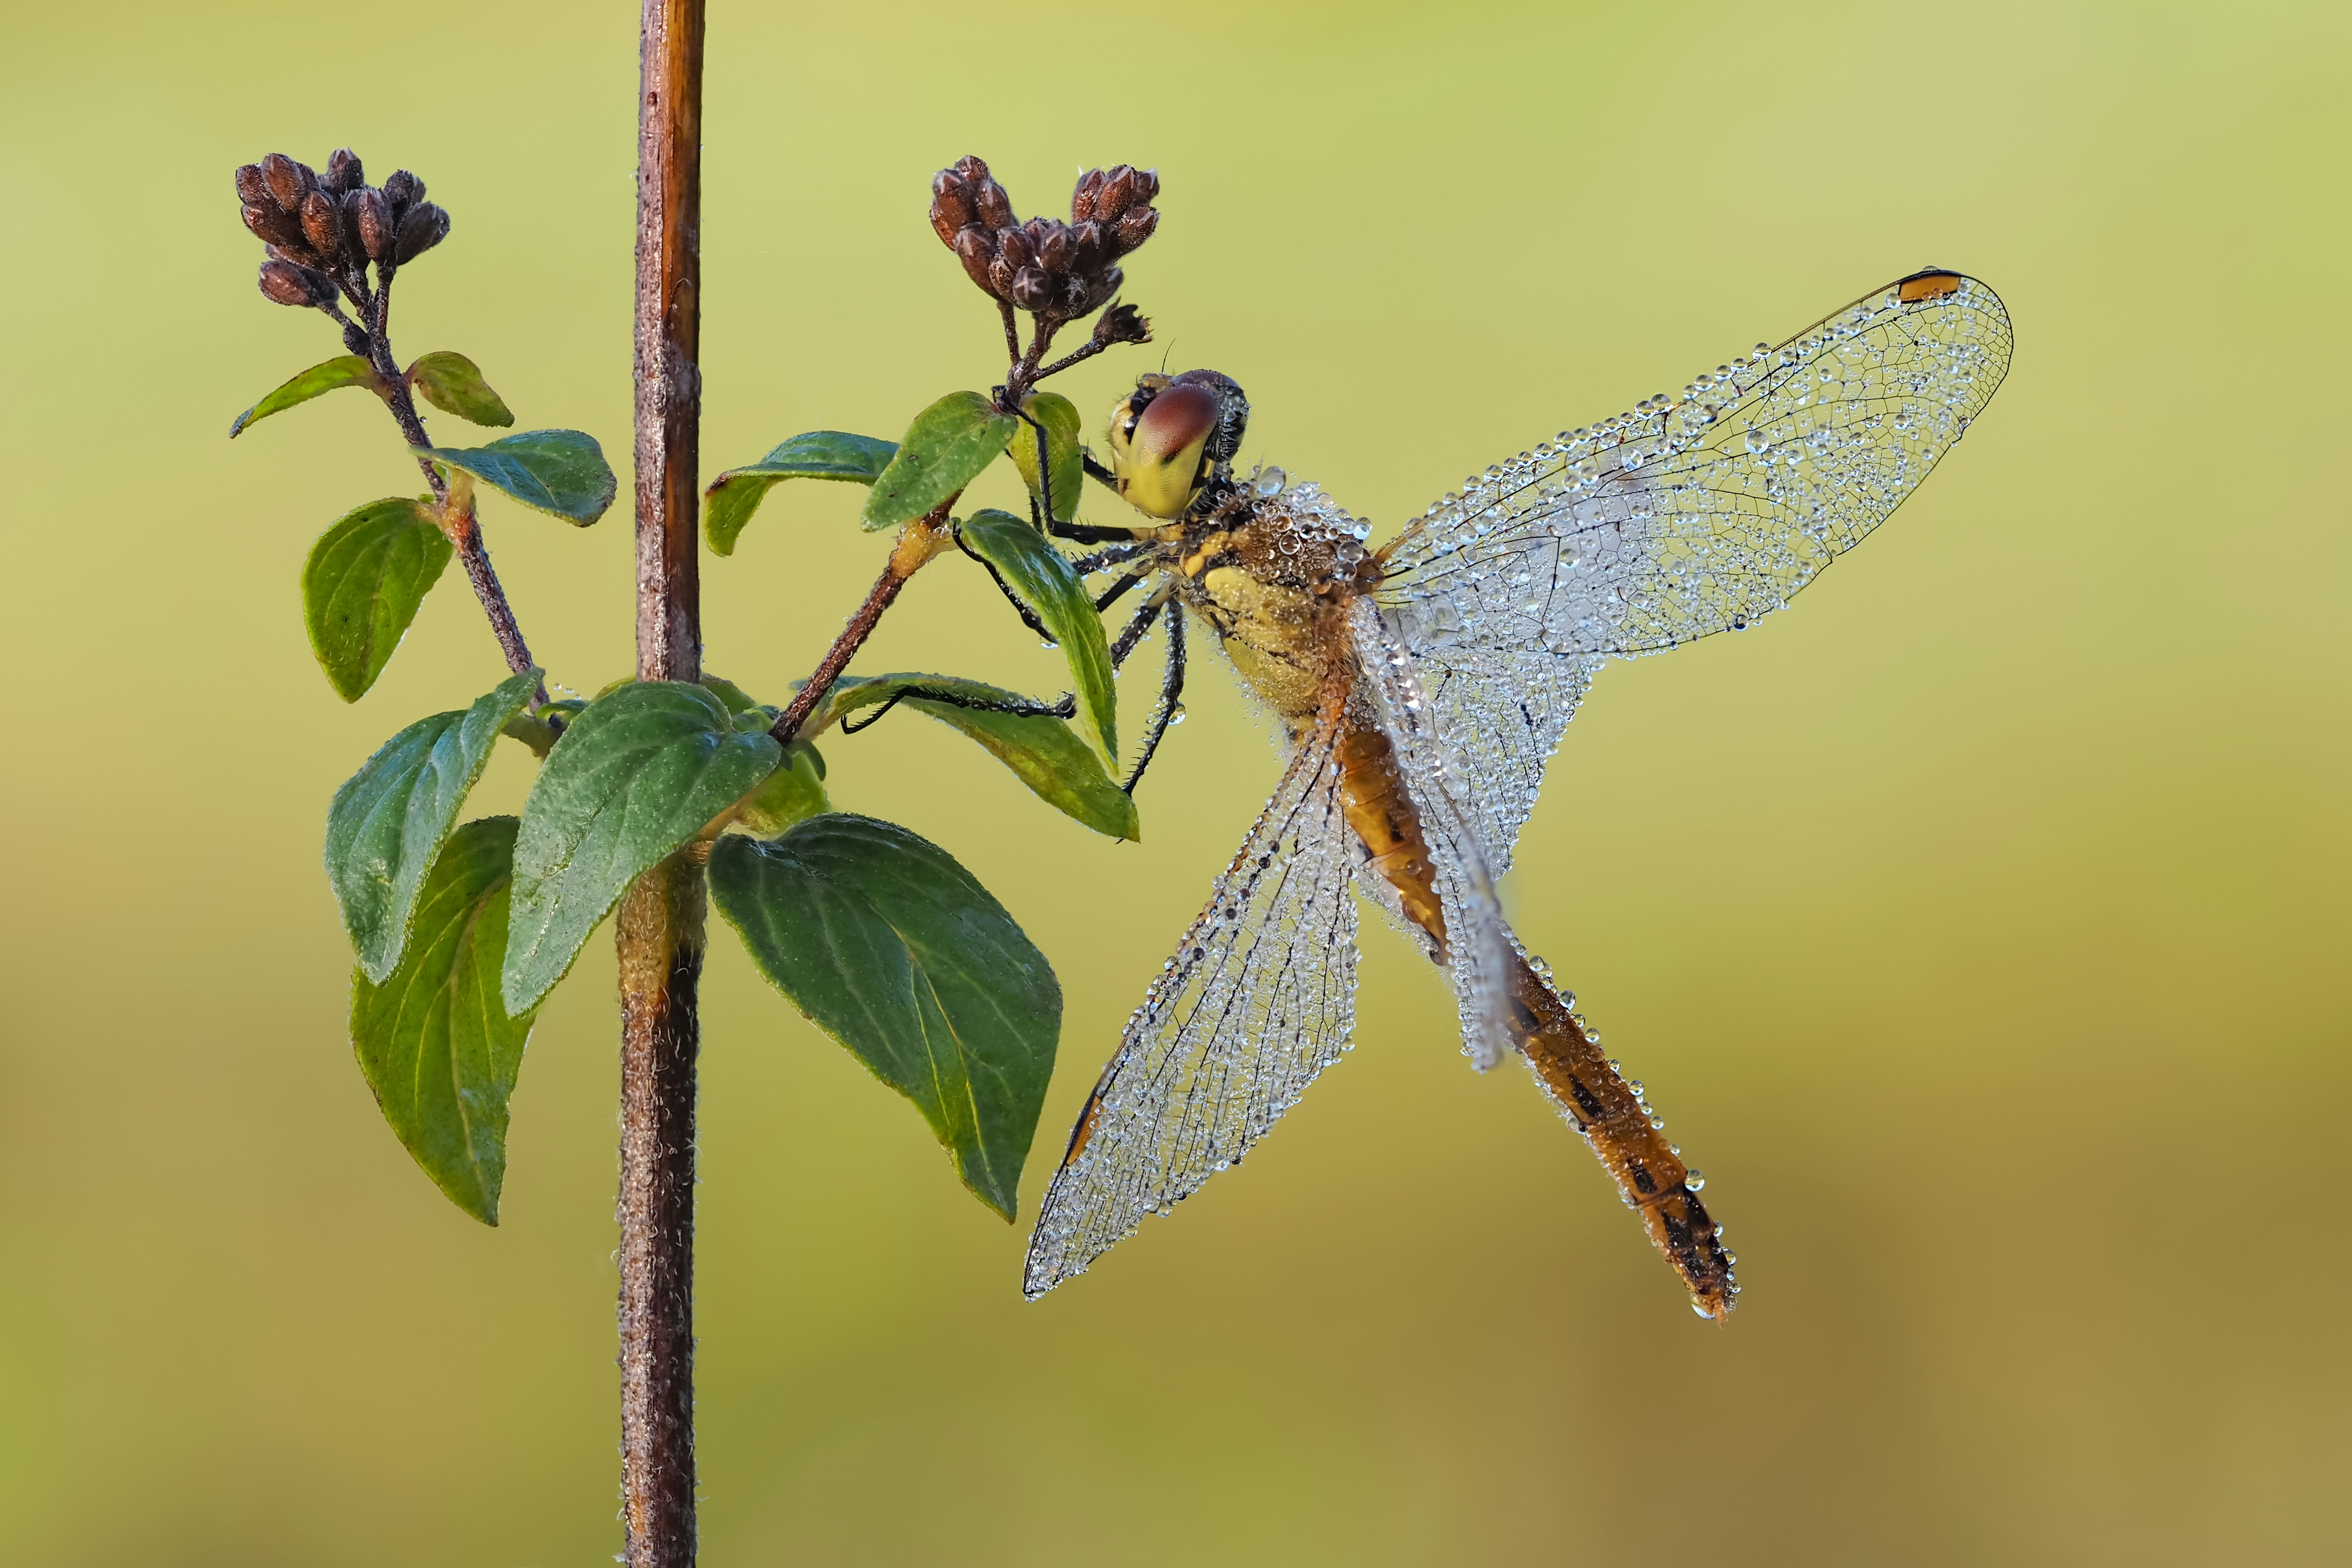 brown and black dragonfly perched on green plant stem during daytime